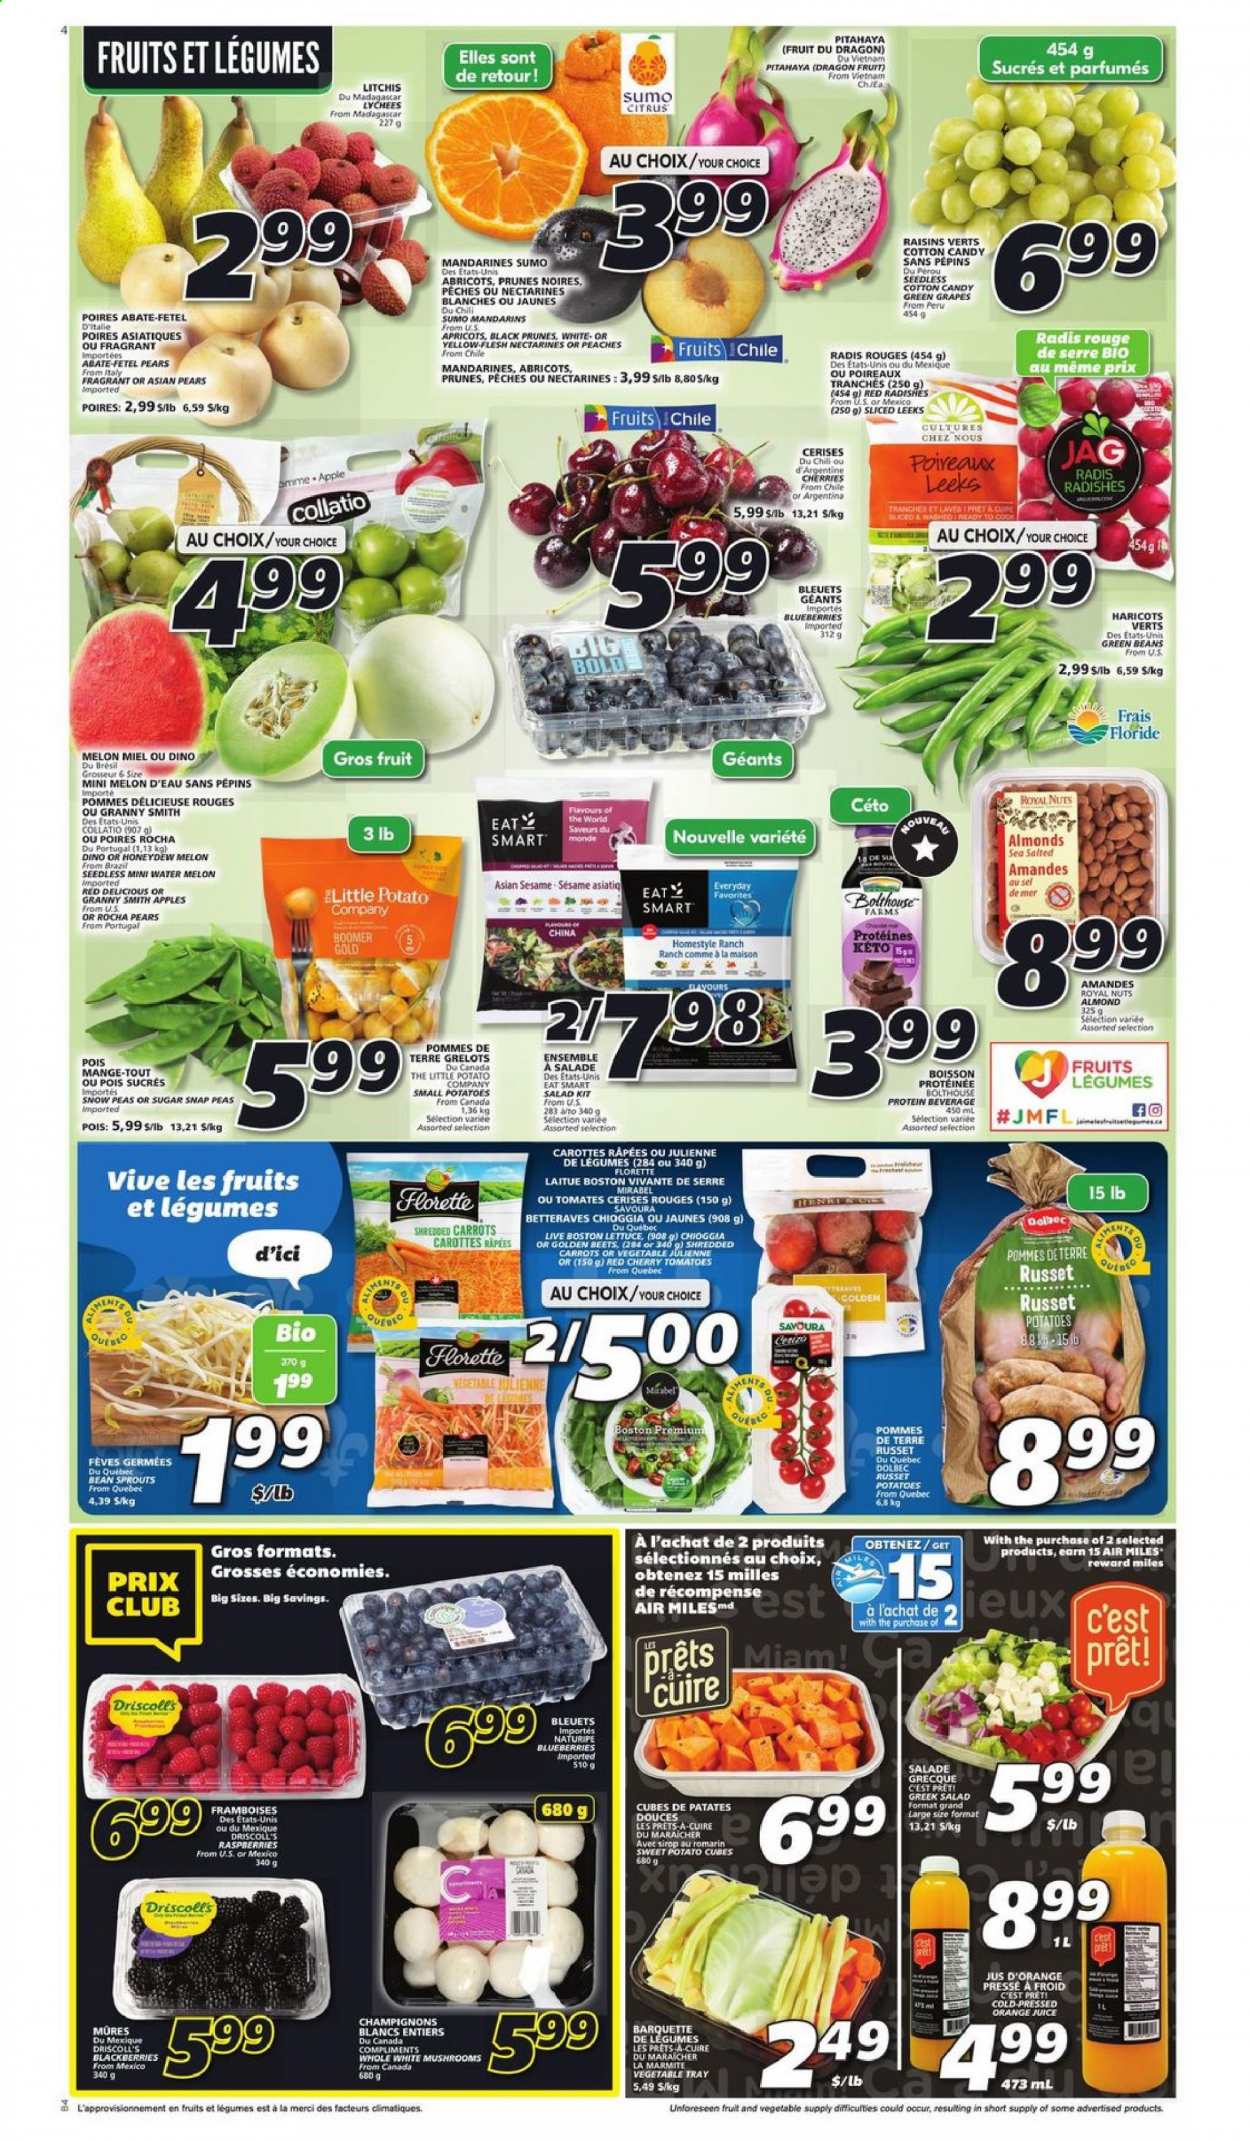 thumbnail - IGA Flyer - January 14, 2021 - January 20, 2021 - Sales products - mushrooms, beans, carrots, green beans, radishes, russet potatoes, sweet potato, tomatoes, potatoes, peas, salad, bean sprouts, snap peas, snow peas, apples, blackberries, blueberries, grapes, mandarines, nectarines, Red Delicious apples, watermelon, honeydew, pears, melons, apricots, dragon fruit, peaches, Granny Smith, sumo citrus, protein drink, cotton candy, Merci, almonds, prunes, dried fruit, orange juice, juice, raisins. Page 3.